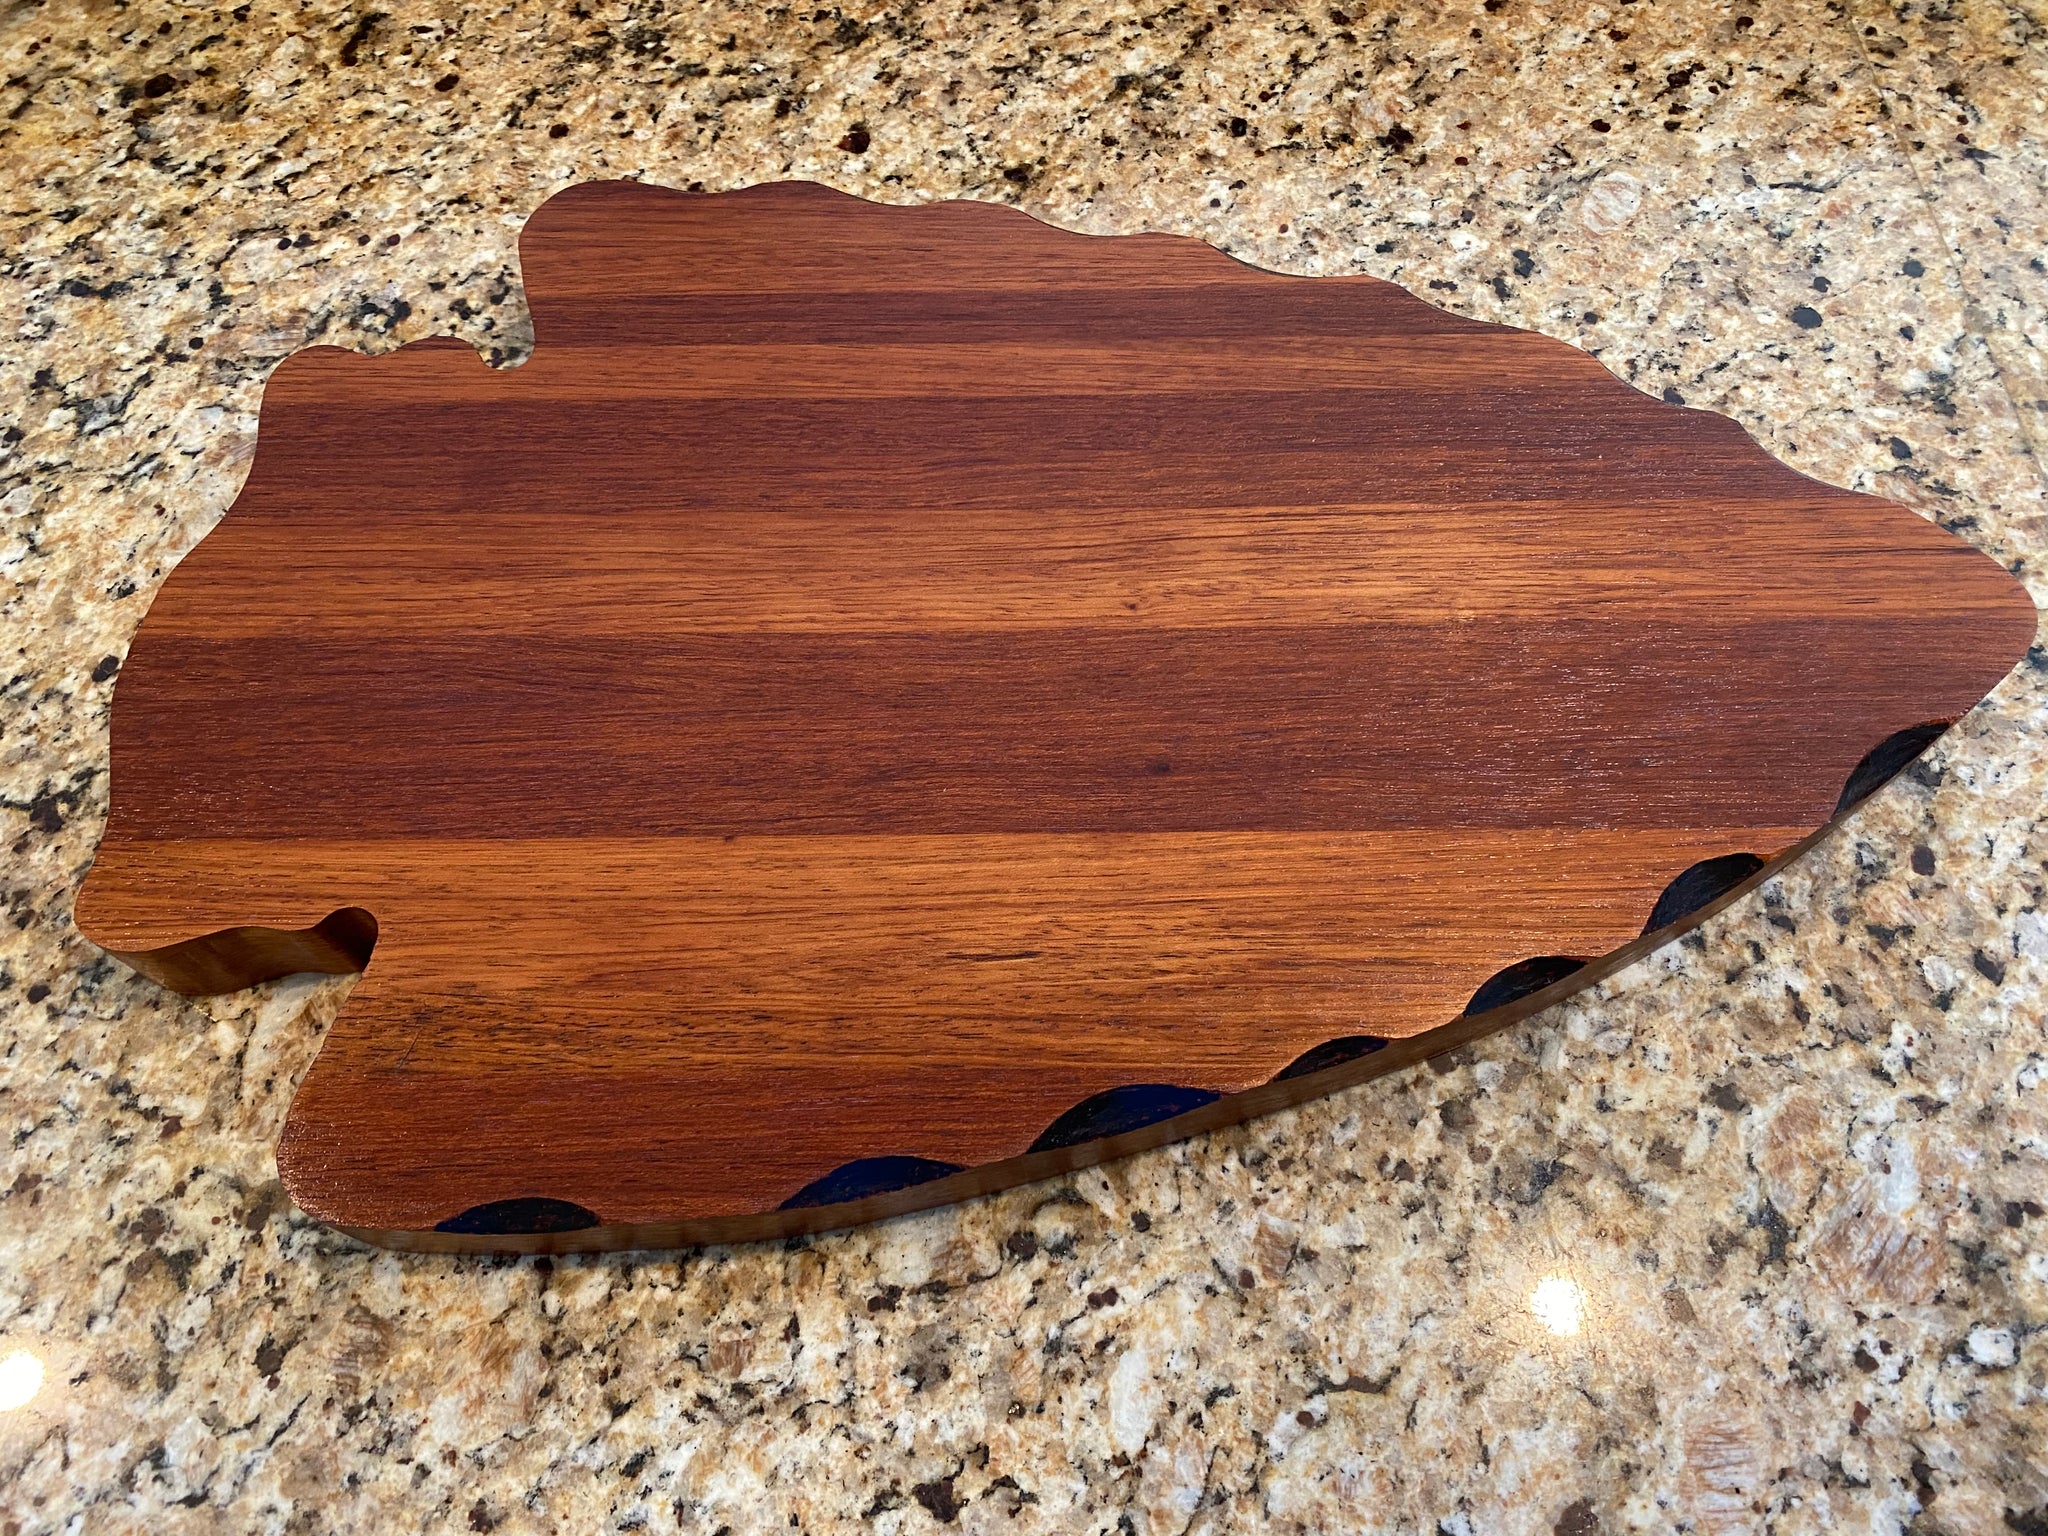 Bread board made of the Brazilian hardwoods, tigerwood, greenheart, curupay  a;ongside Dutch maple. A suitable size of 23x50 cm. - Kitchen artwoods